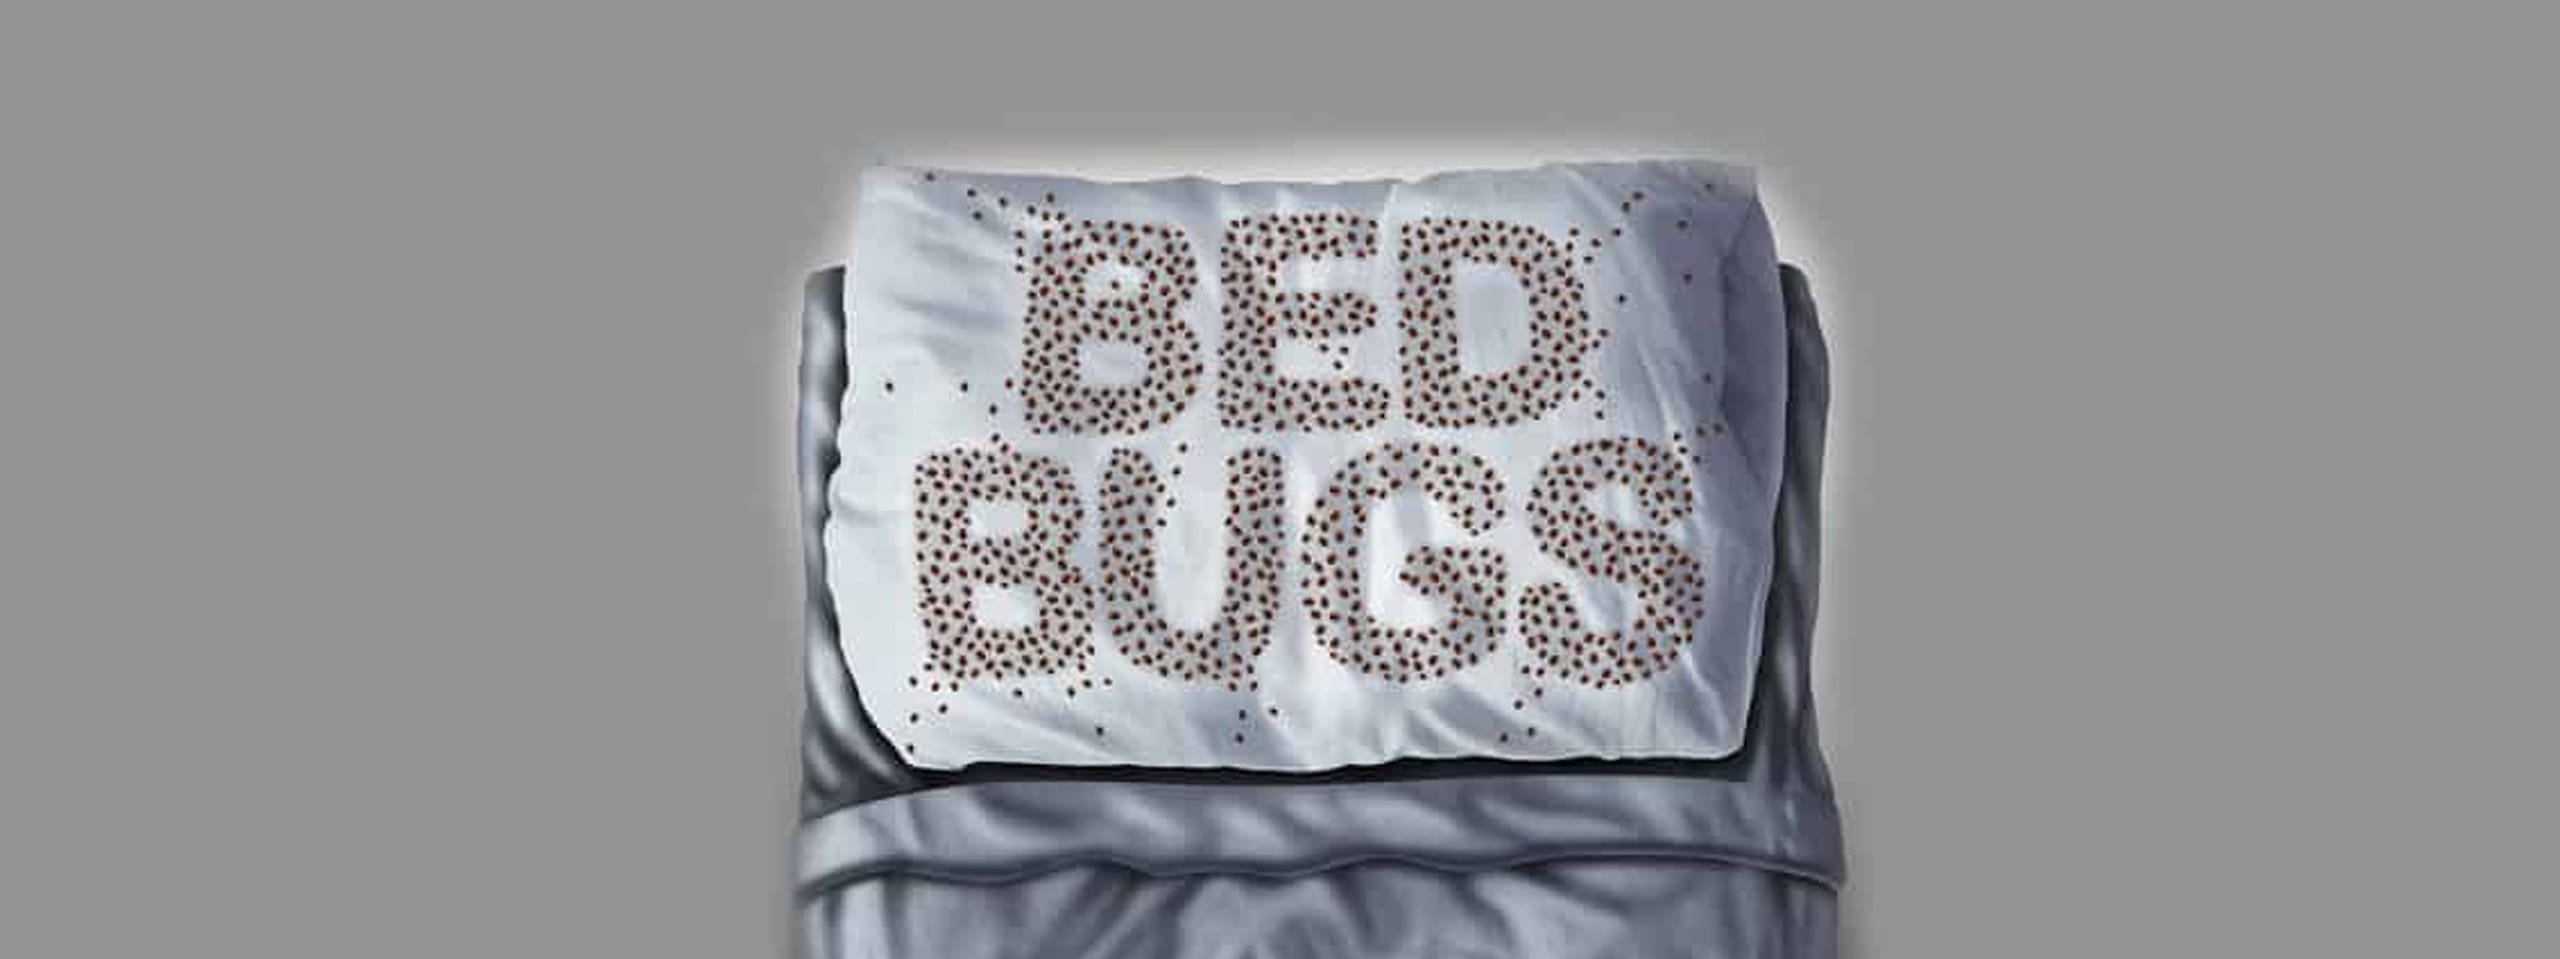 How To Detect Bed Bugs in Your Hotel